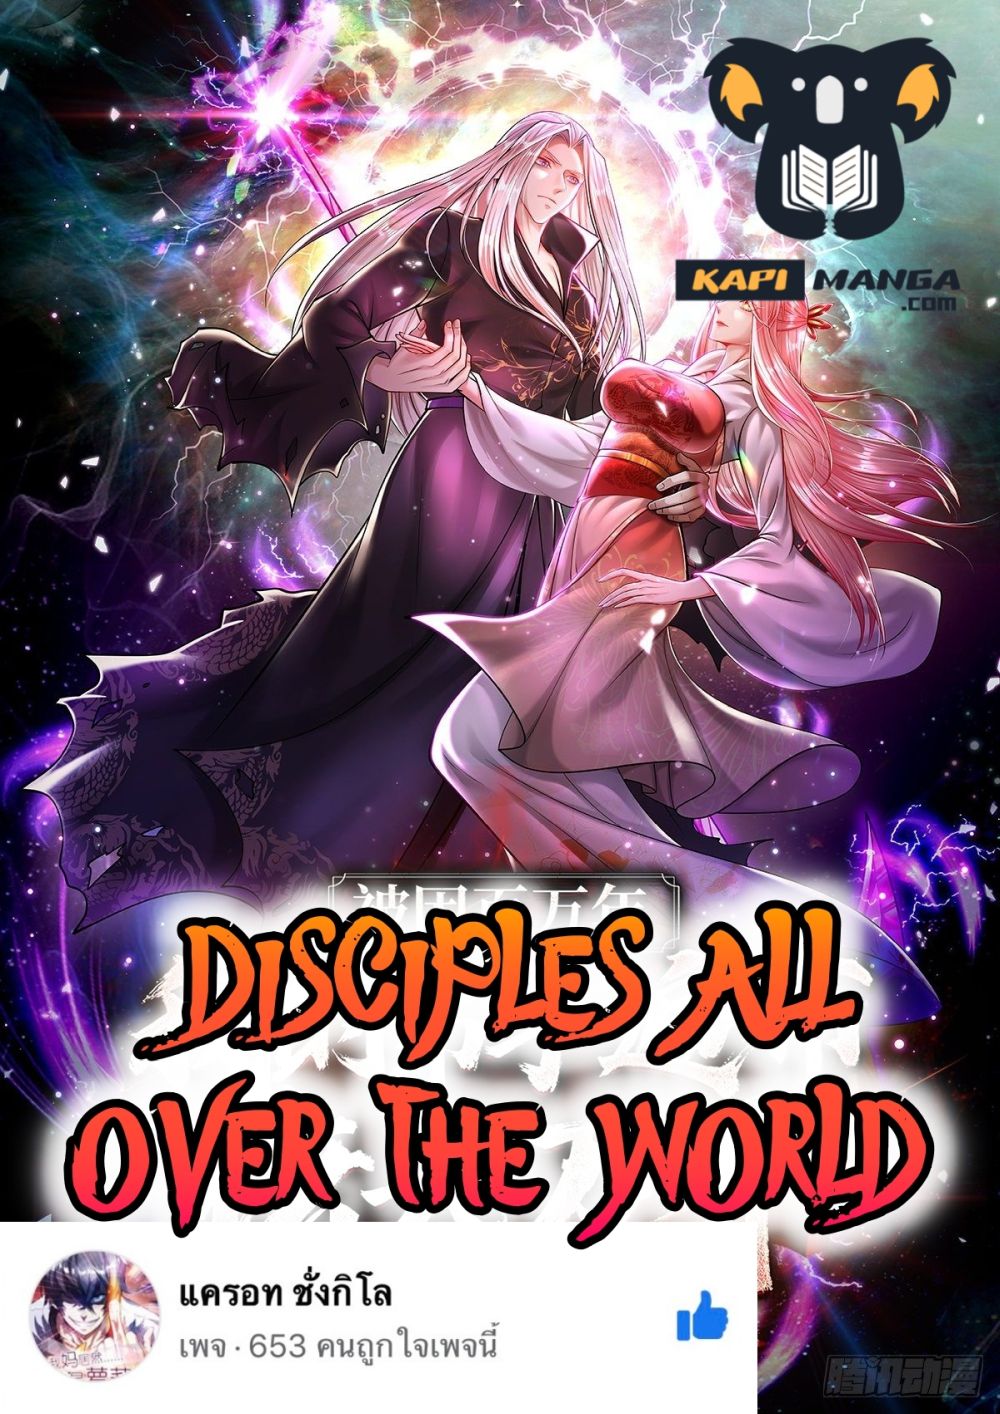 Disciples All Over the World à¸à¸­à¸à¸à¸µà¹ 38 (1)